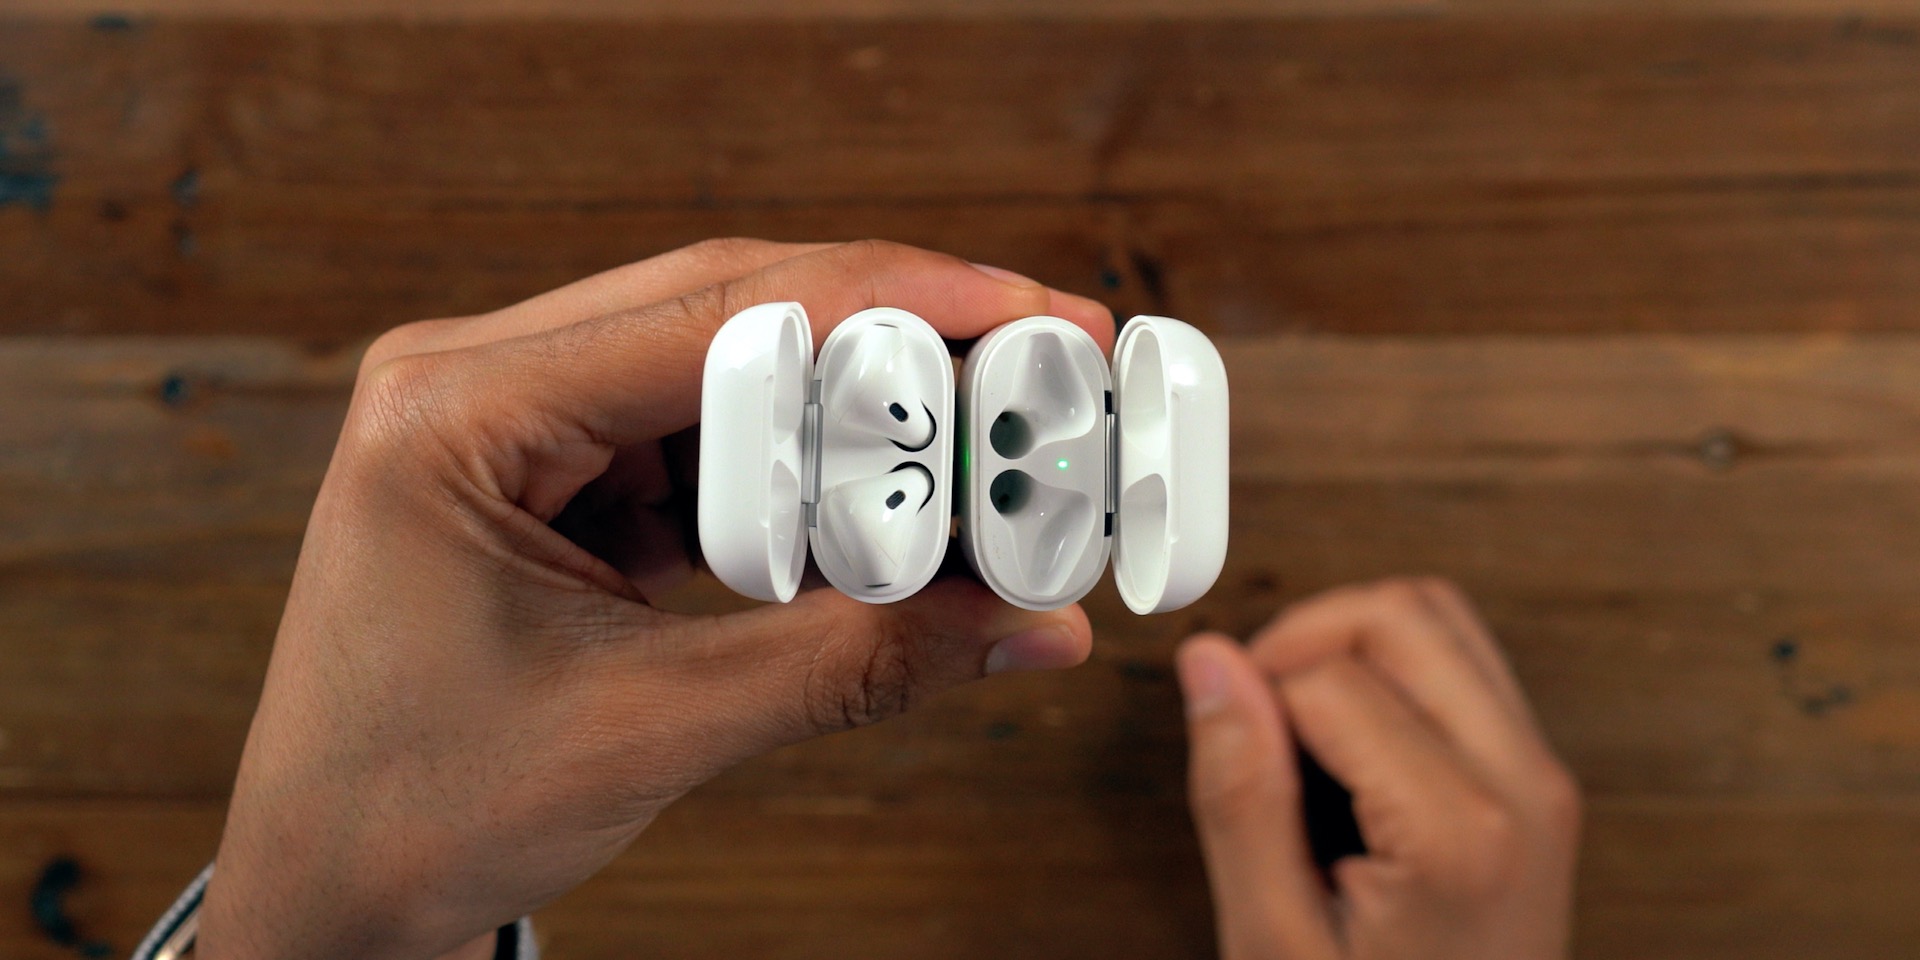 Wireless Case for AirPods [Video] - 9to5Mac